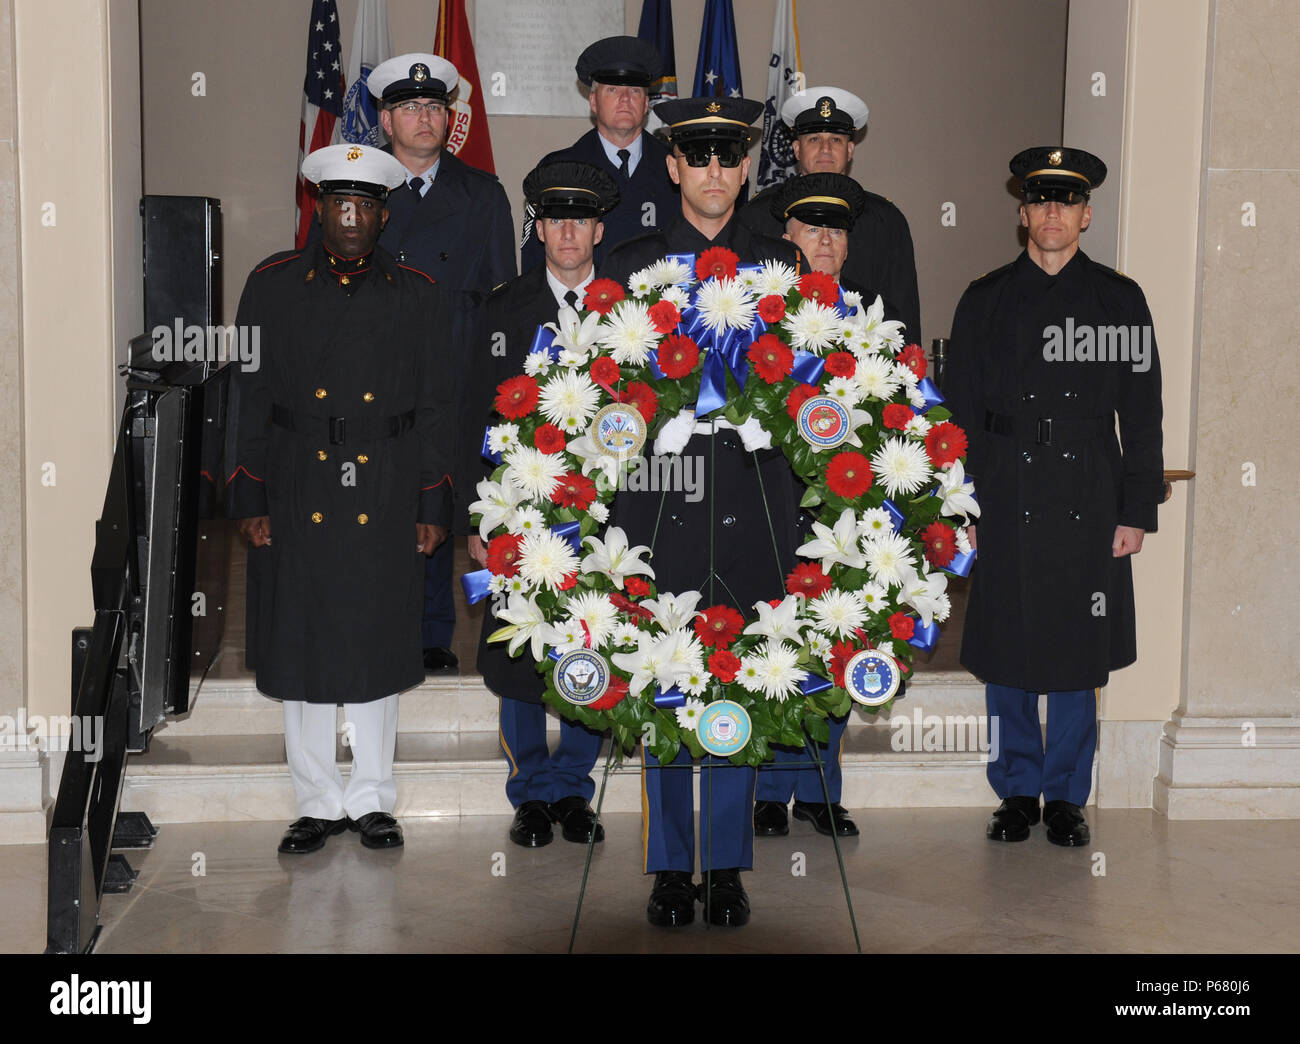 Group shot of The Senior Enlisted Advisor to the Chairman of the Joint  Chiefs of Staff (SEAC), Command Sgt. Major John W. Troxell along with  members of the Wreath Laying Party and